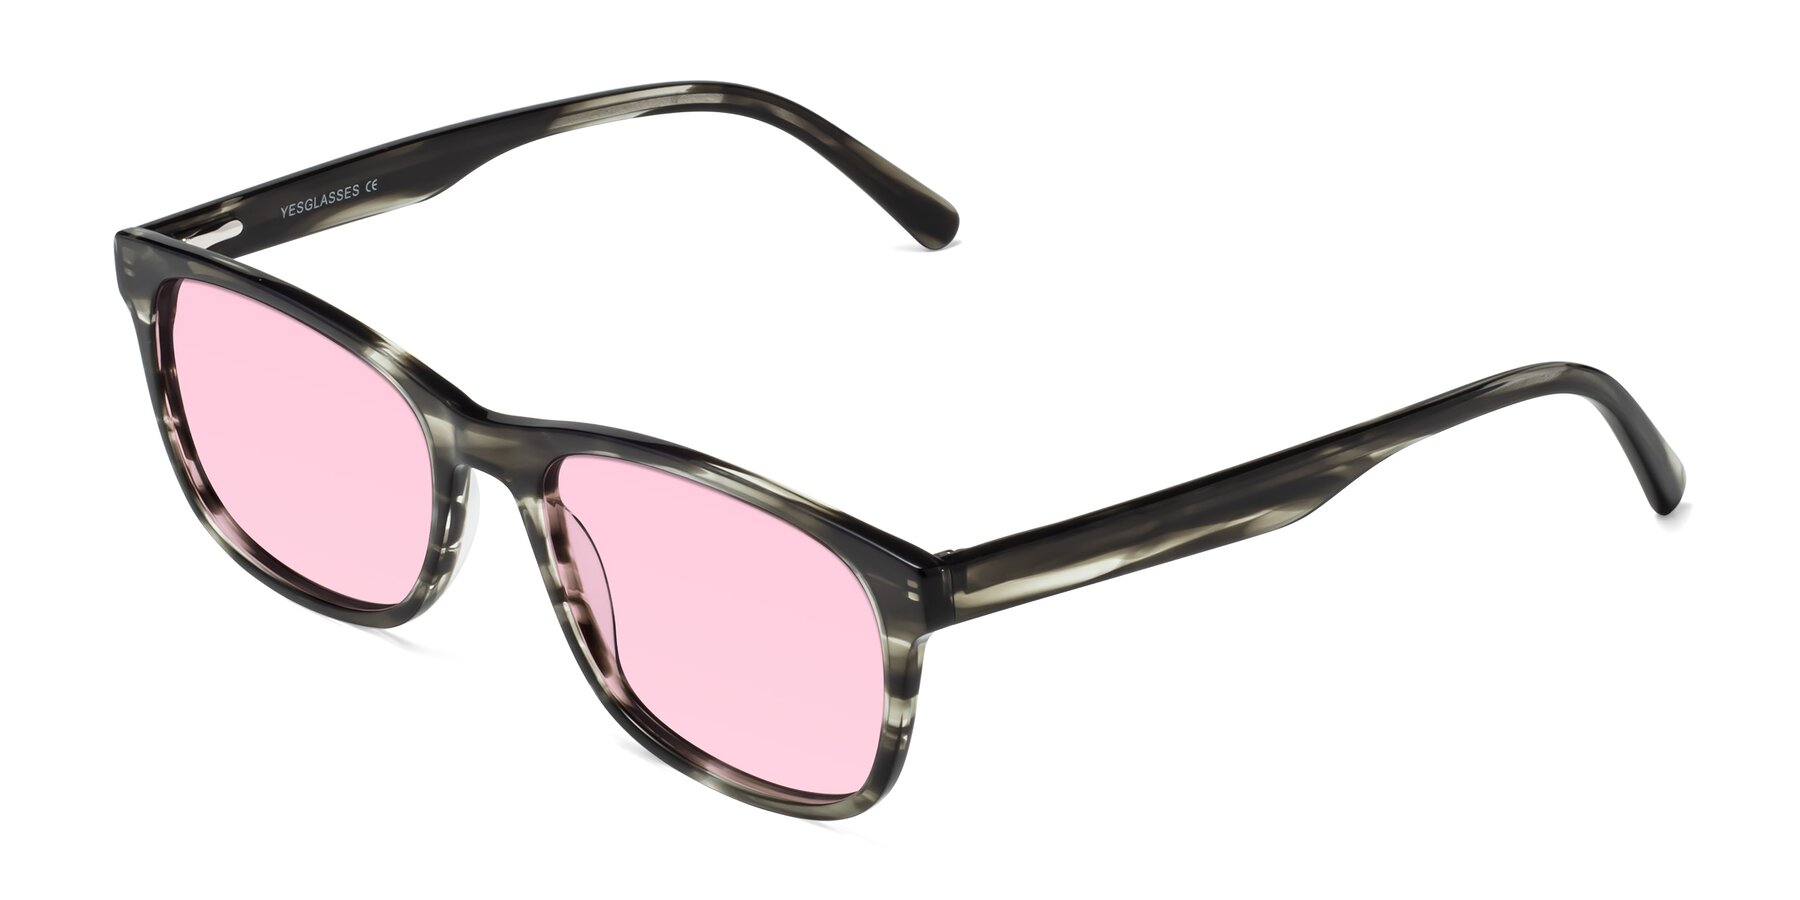 Angle of Navarro in Gray-Tortoise with Light Pink Tinted Lenses